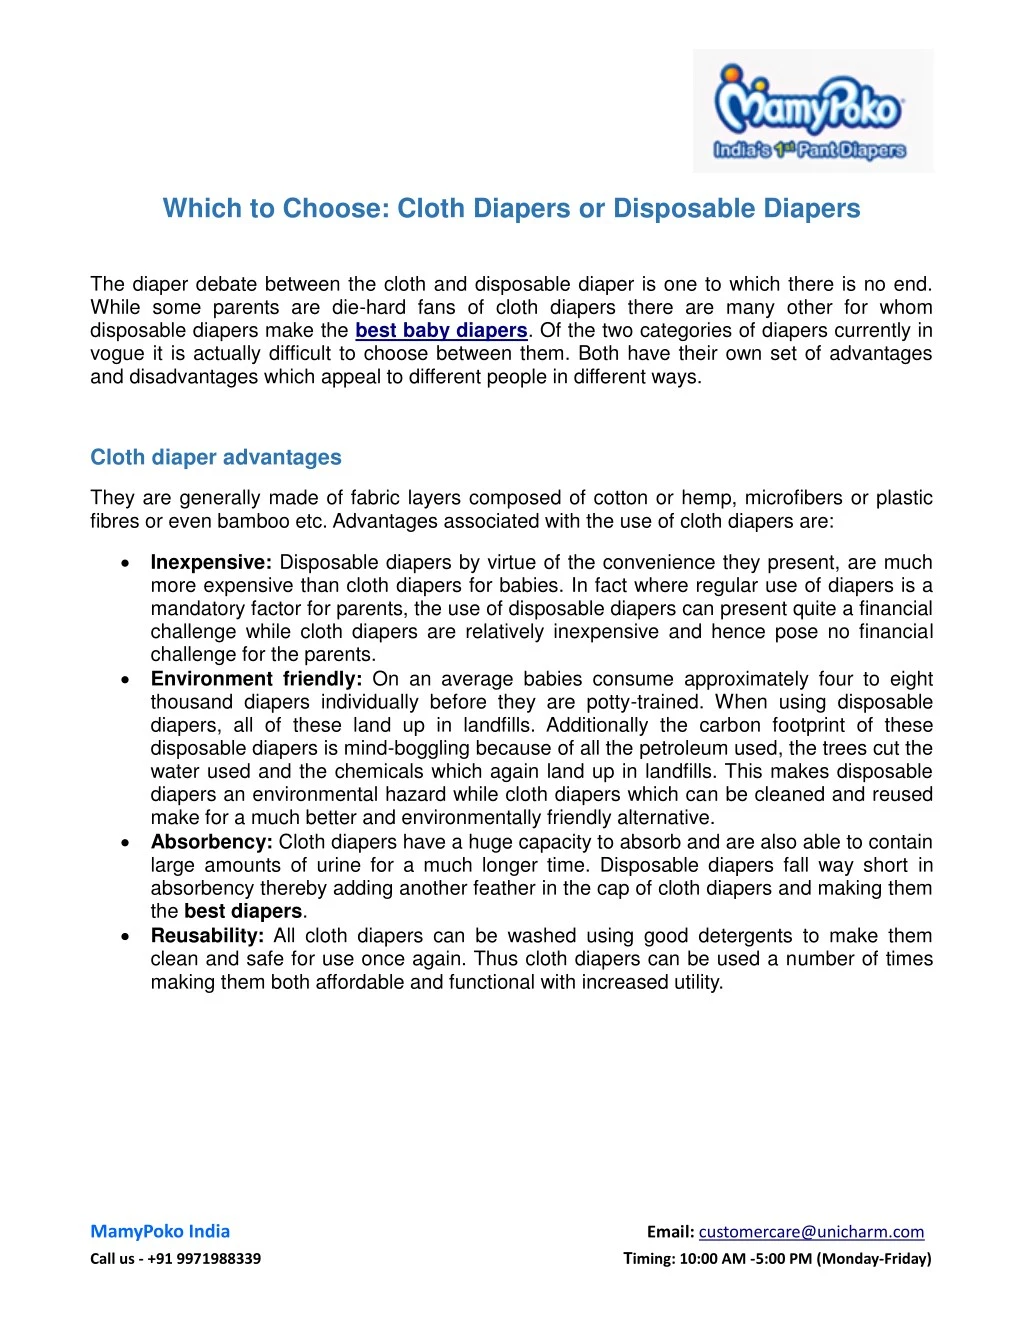 which to choose cloth diapers or disposable